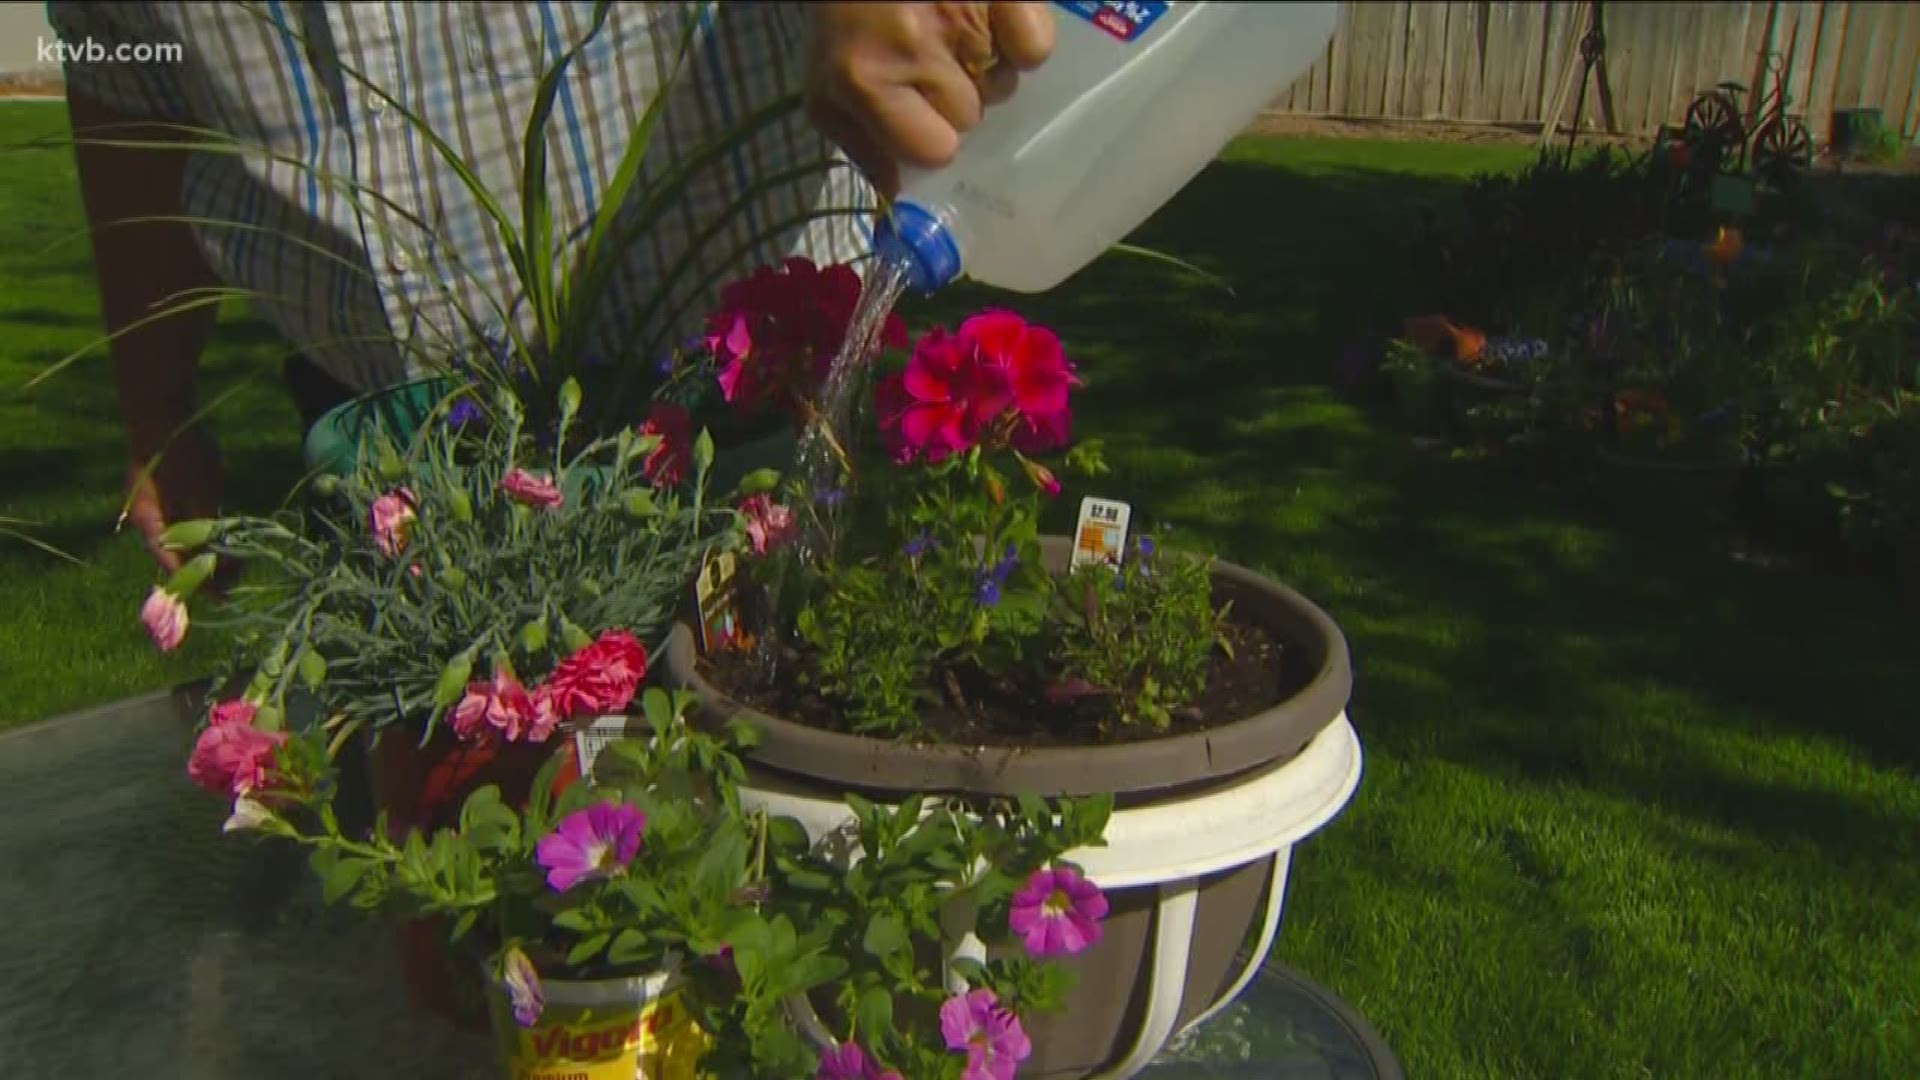 Jim Duthie shows us some garden hacks that will save you time and money.